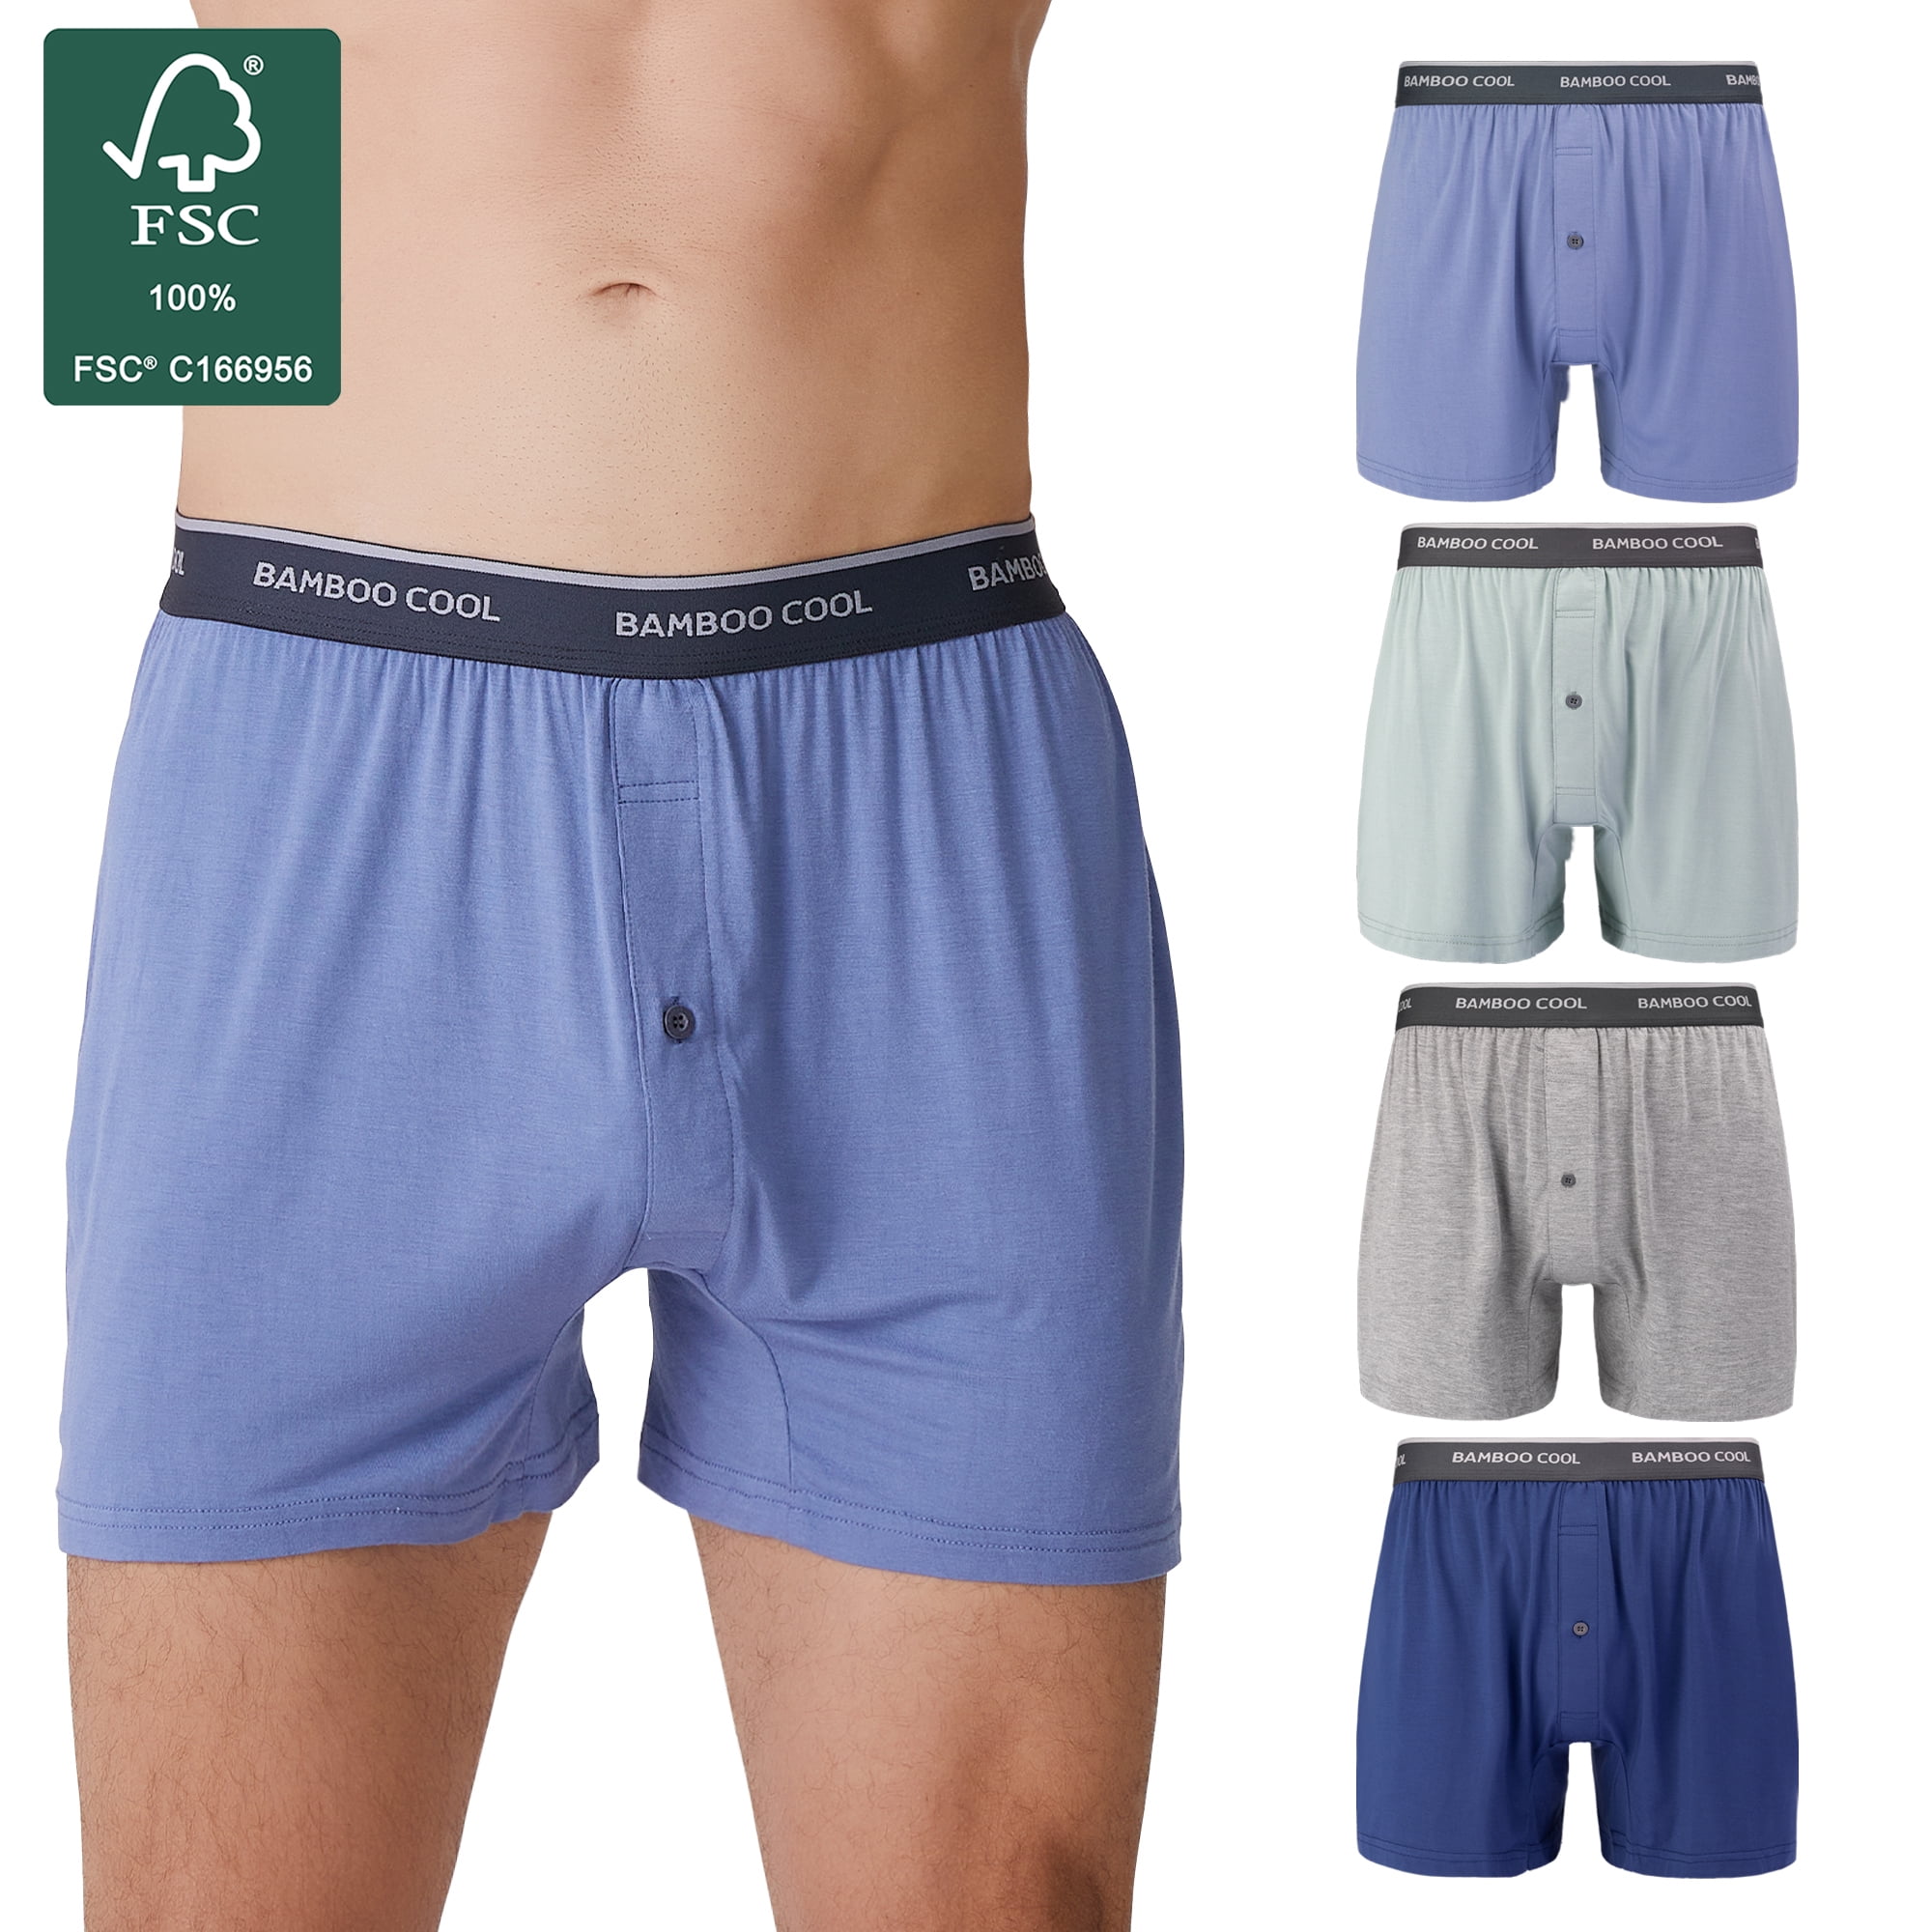 Men's Boxer Shorts Moisture-Wicking,Breathable Bamboo Viscose Underwear with  Button Fly,4 Pack 